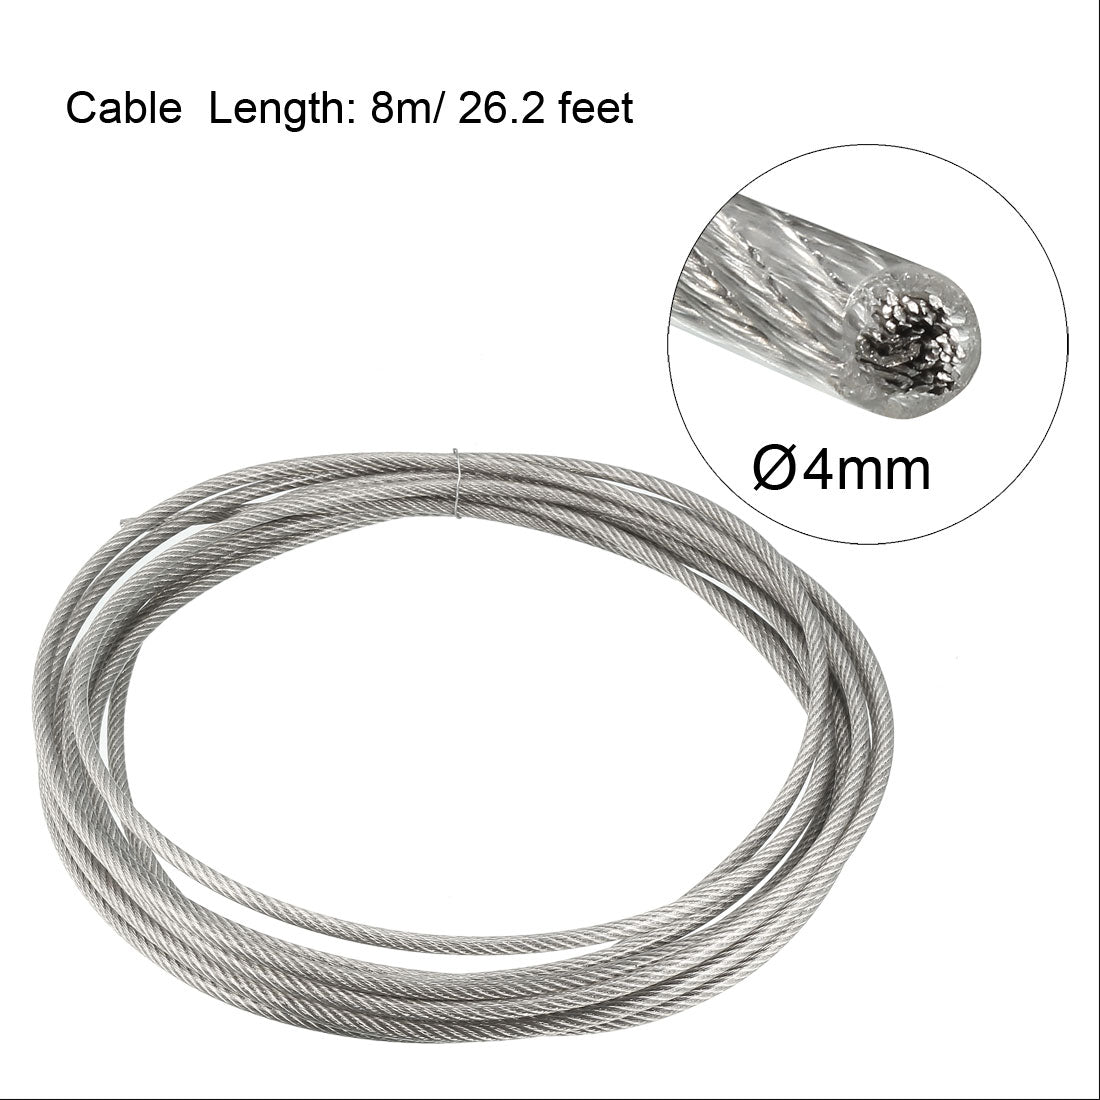 uxcell Uxcell Stainless Steel Wire Rope Cable 4mm 0.16 inch Dia 26.2ft 8m Length 8 Gauge 304 Grade PVC Coated for Hoist Lifting Grinder Pulley Wheel